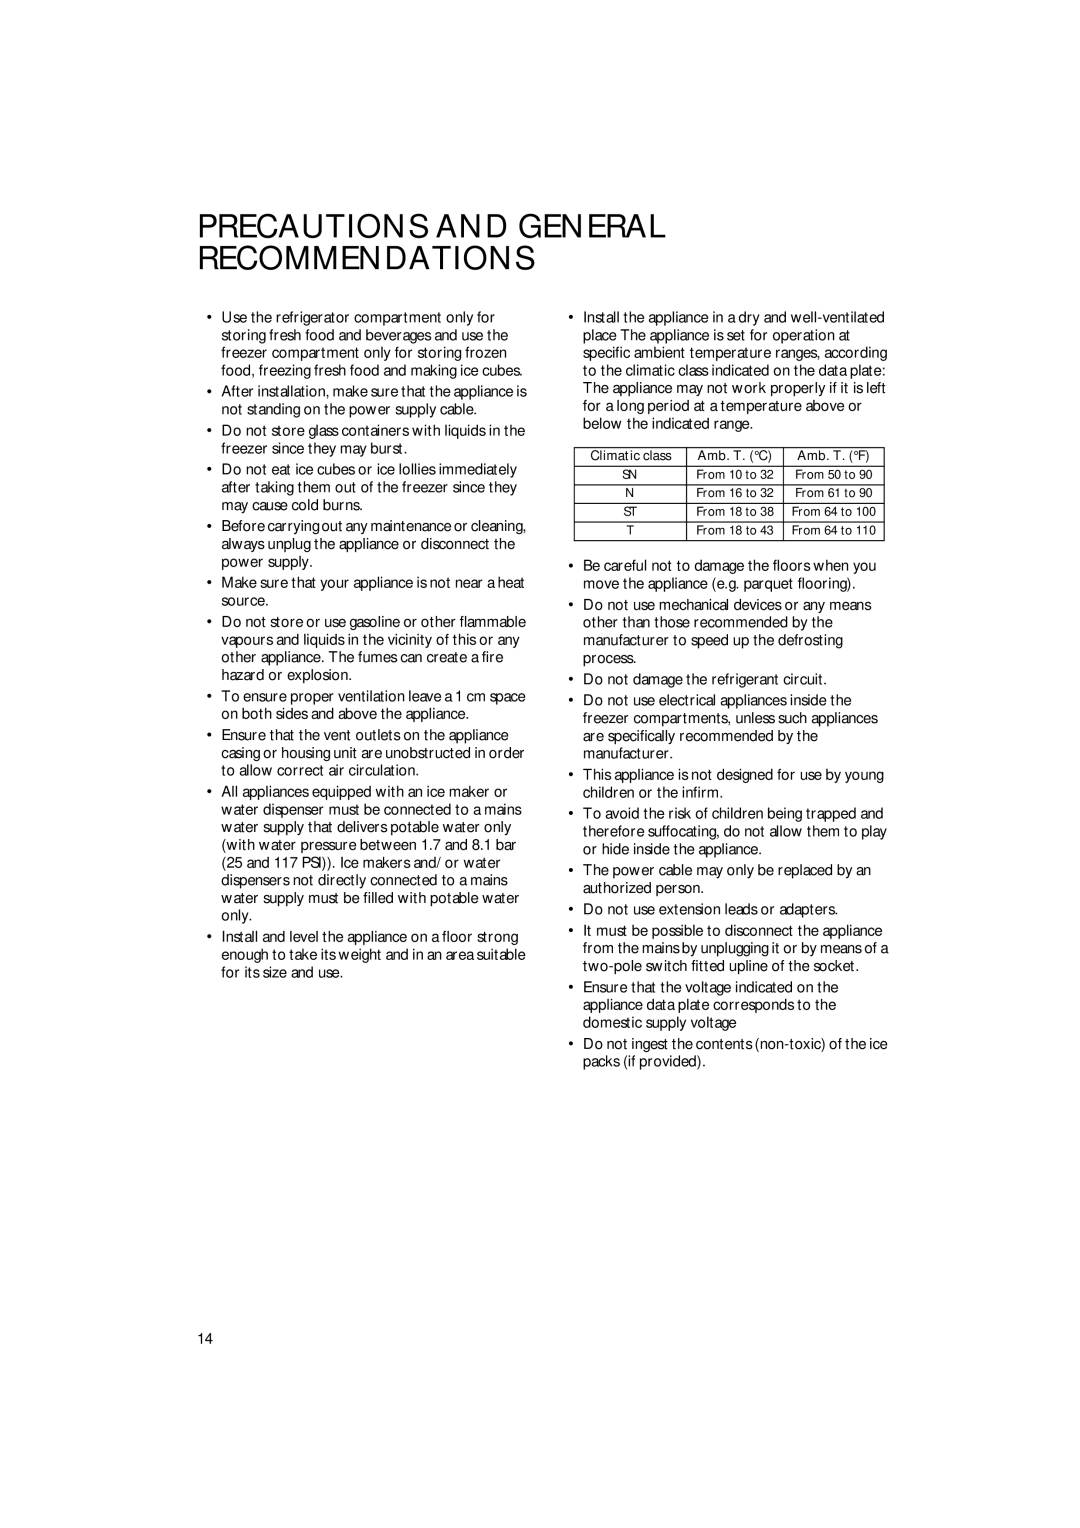 Smeg FR238APL manual Precautions And General Recommendations, Do not damage the refrigerant circuit 